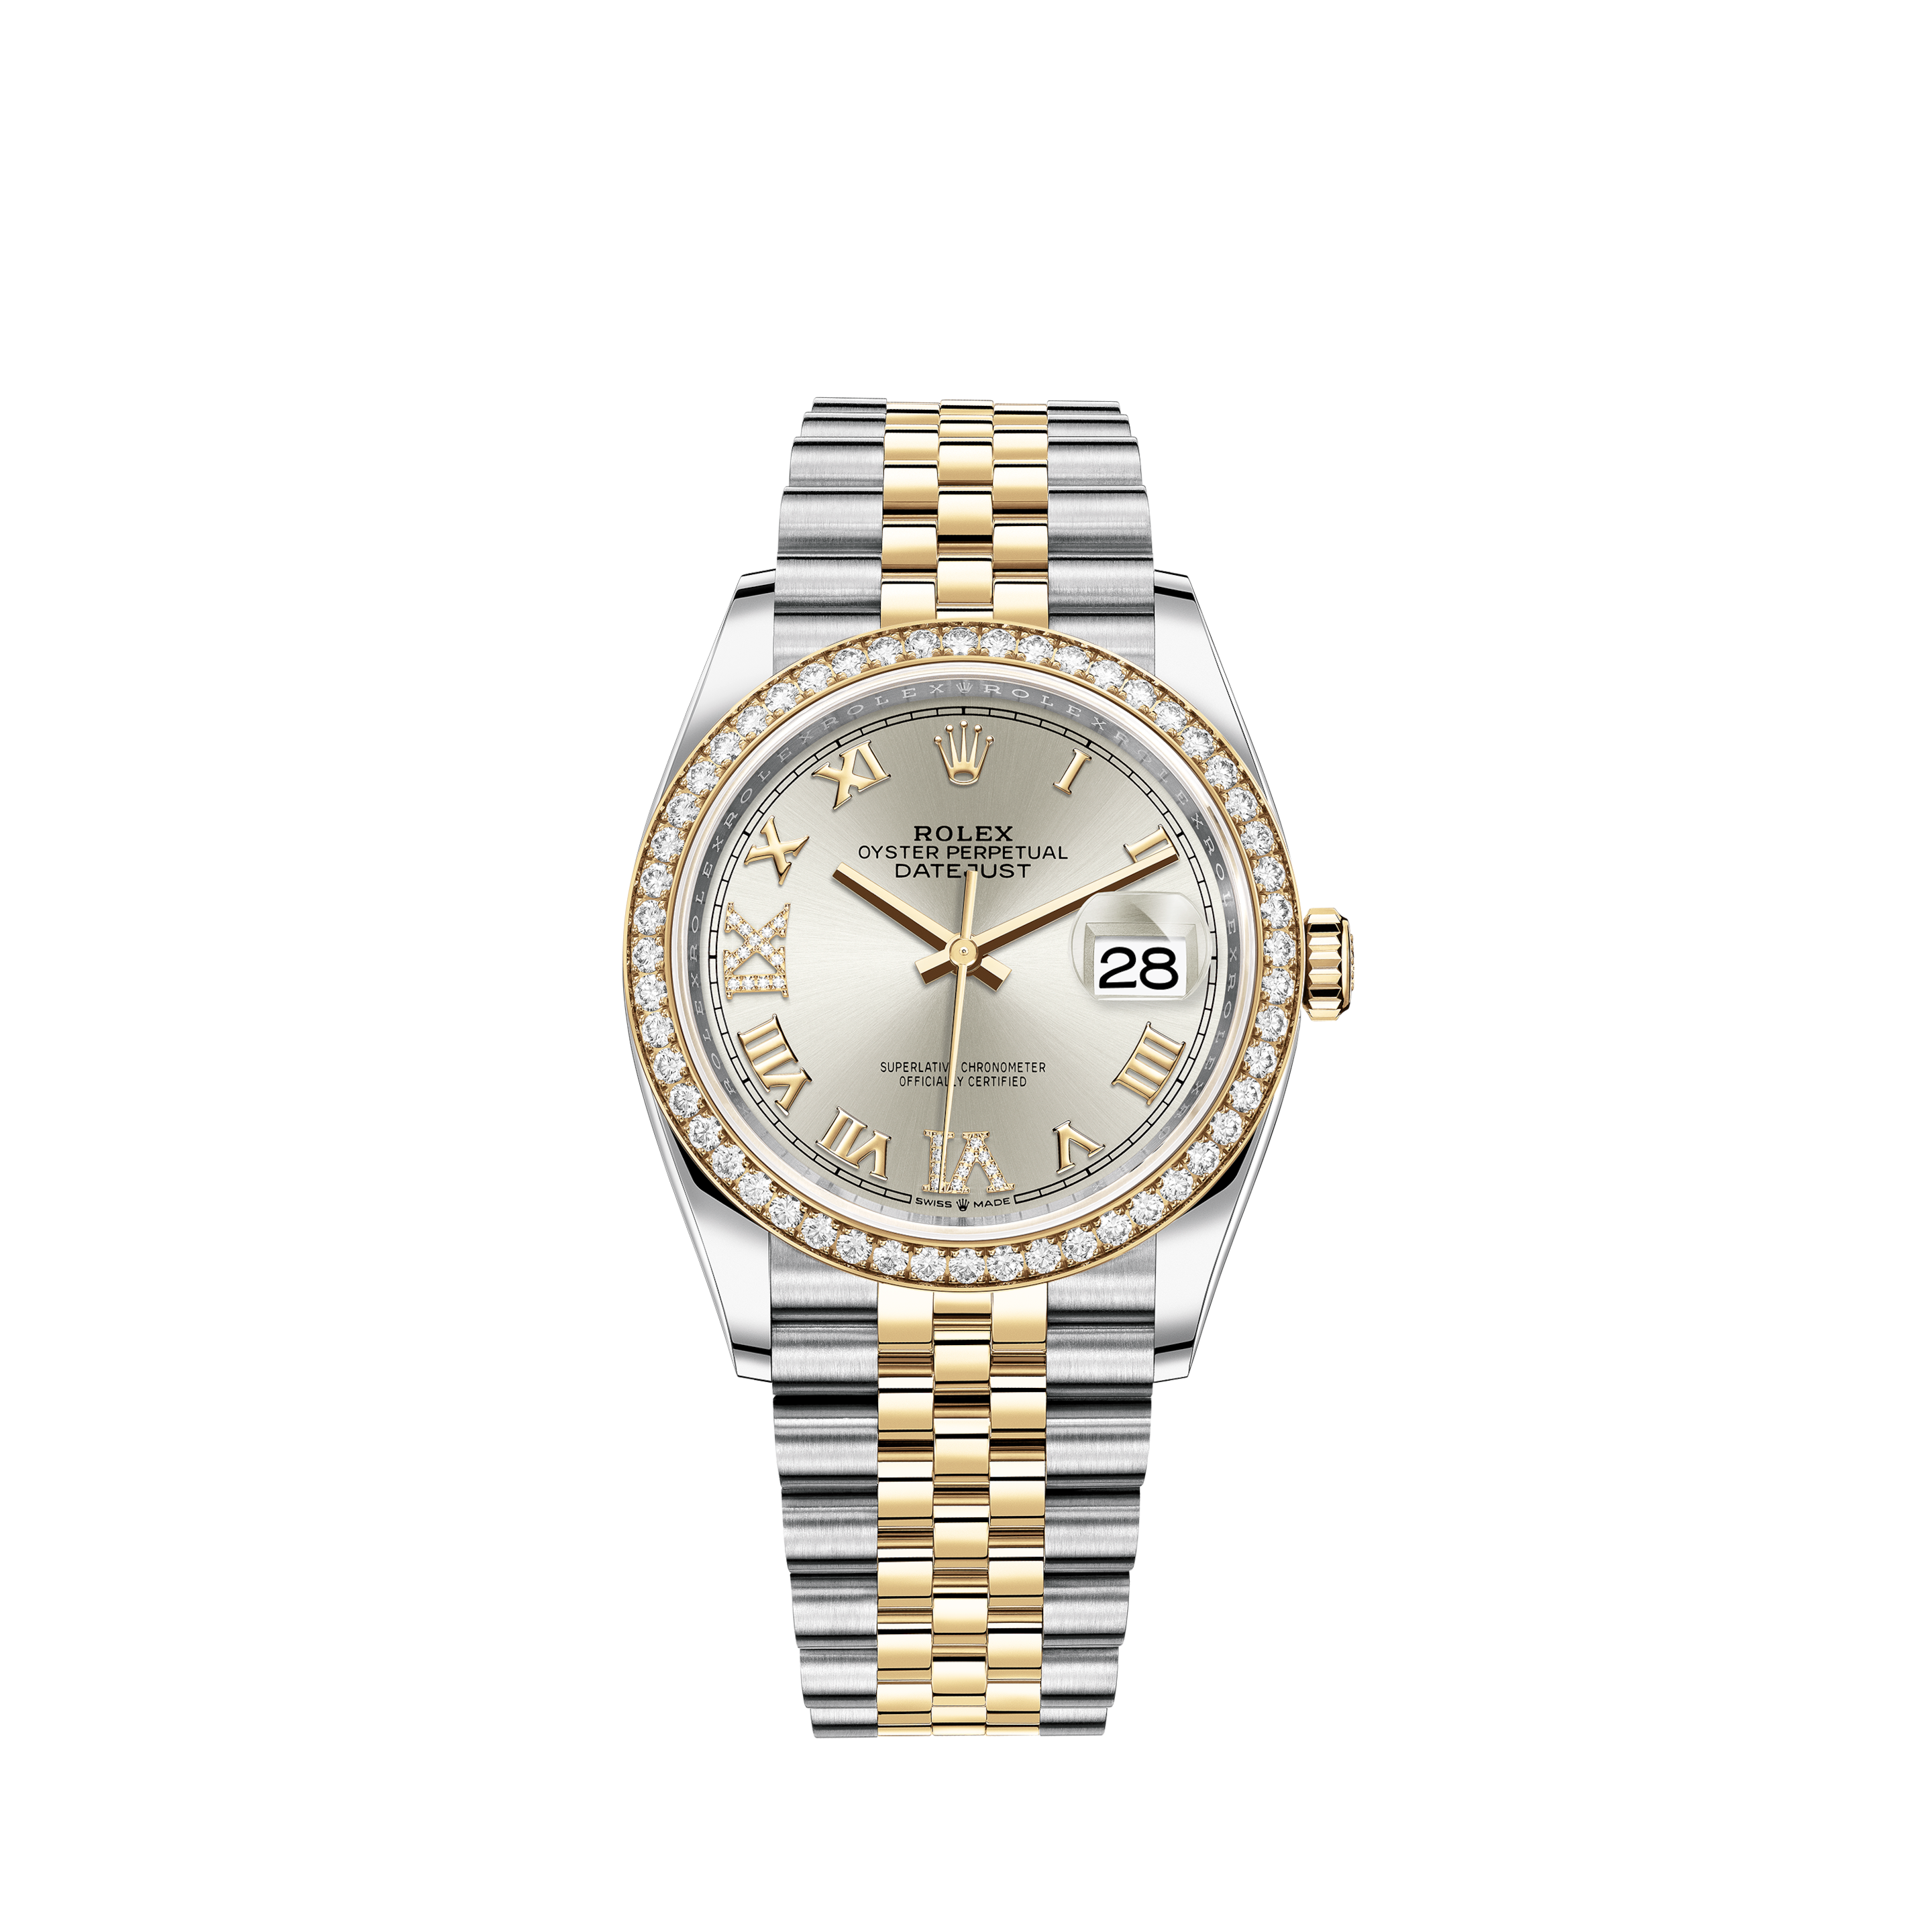 Rolex 116233 Datejust 18k Two Tone Mother Of Pearl Diamond WatchRolex 116233 Datejust Two Tone 12.61ctw Diamond Pave Watch